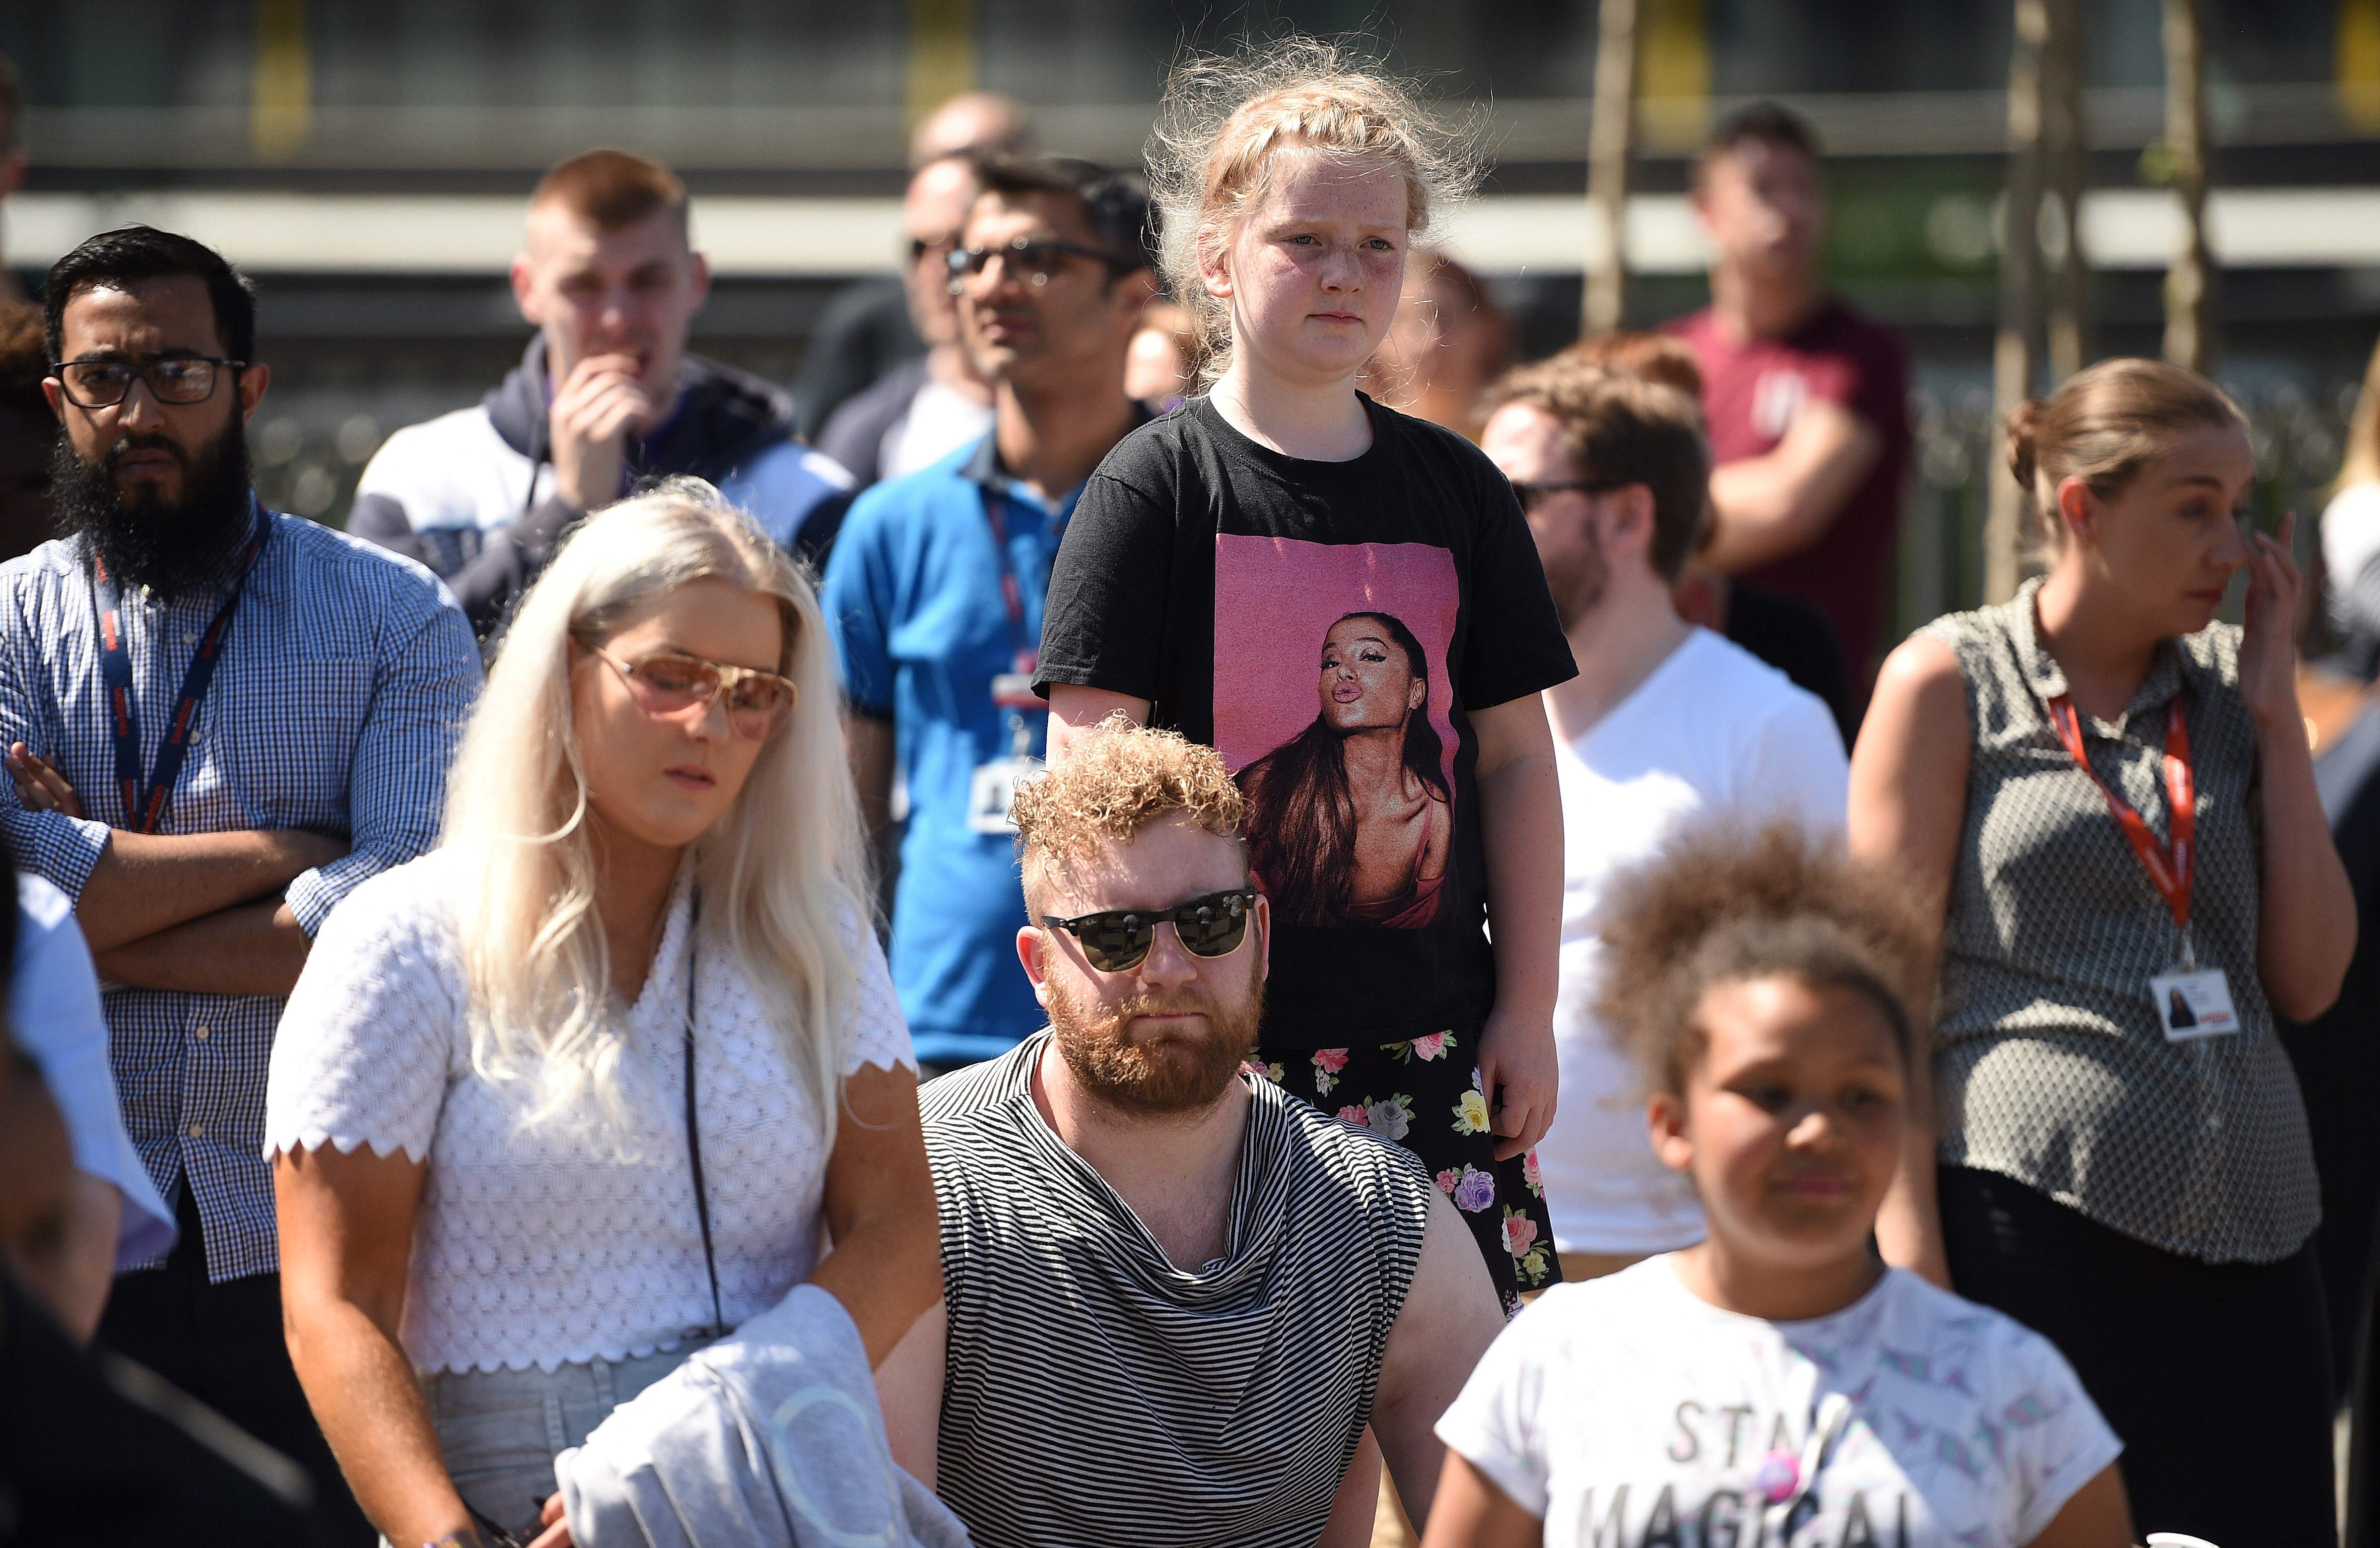 Crowds gather outside Manchester Cathedral as The Manchester Arena National Service of Commemoration takes place in central Manchester on May 22, 2018, on the one year anniversary of the deadly attack at Manchester Arena.  Prime Minister Theresa May a